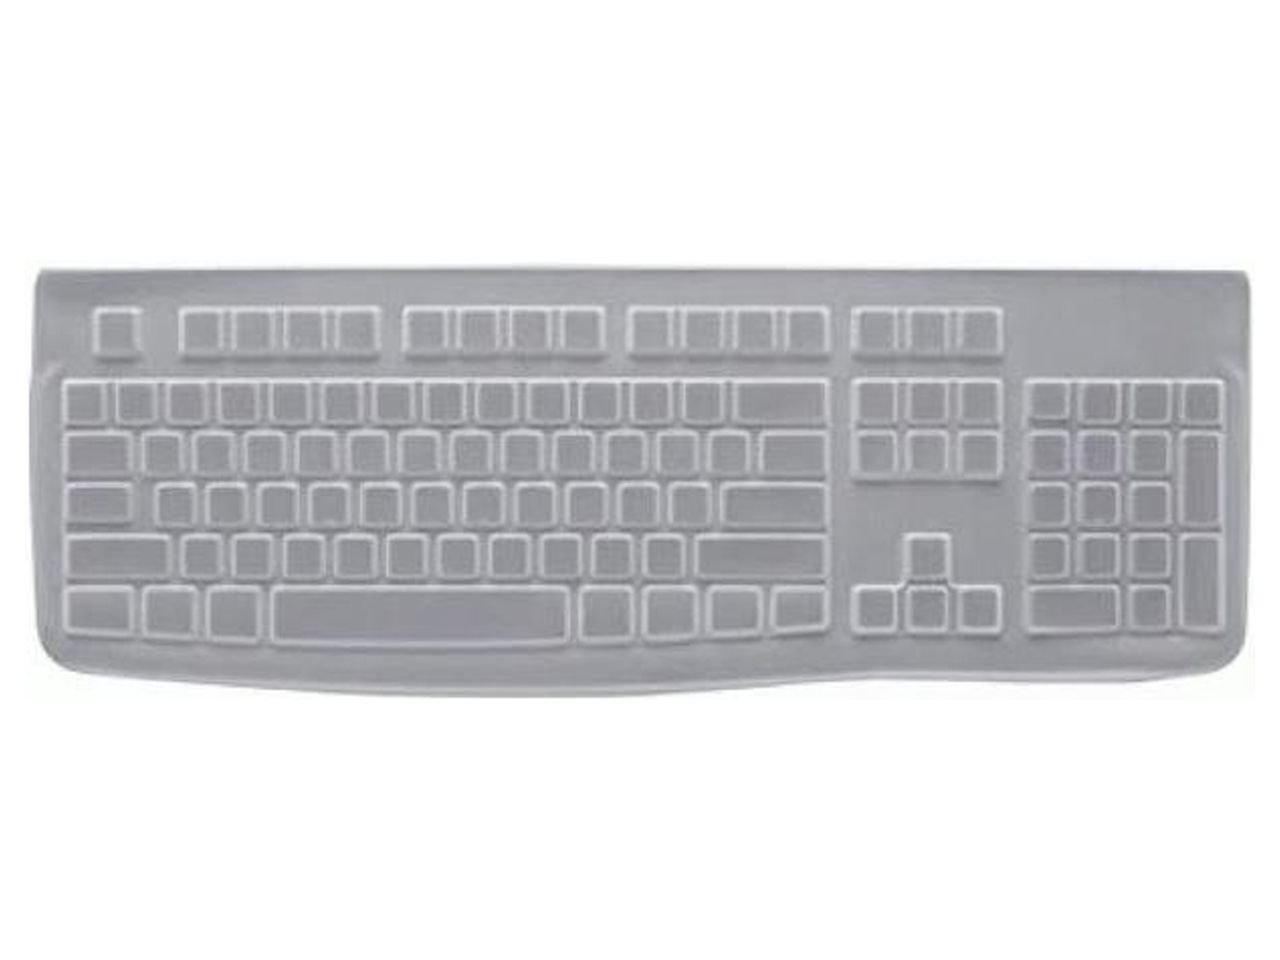 Logitech Protective Covers for K120 Keyboard - Silicone - image 2 of 5